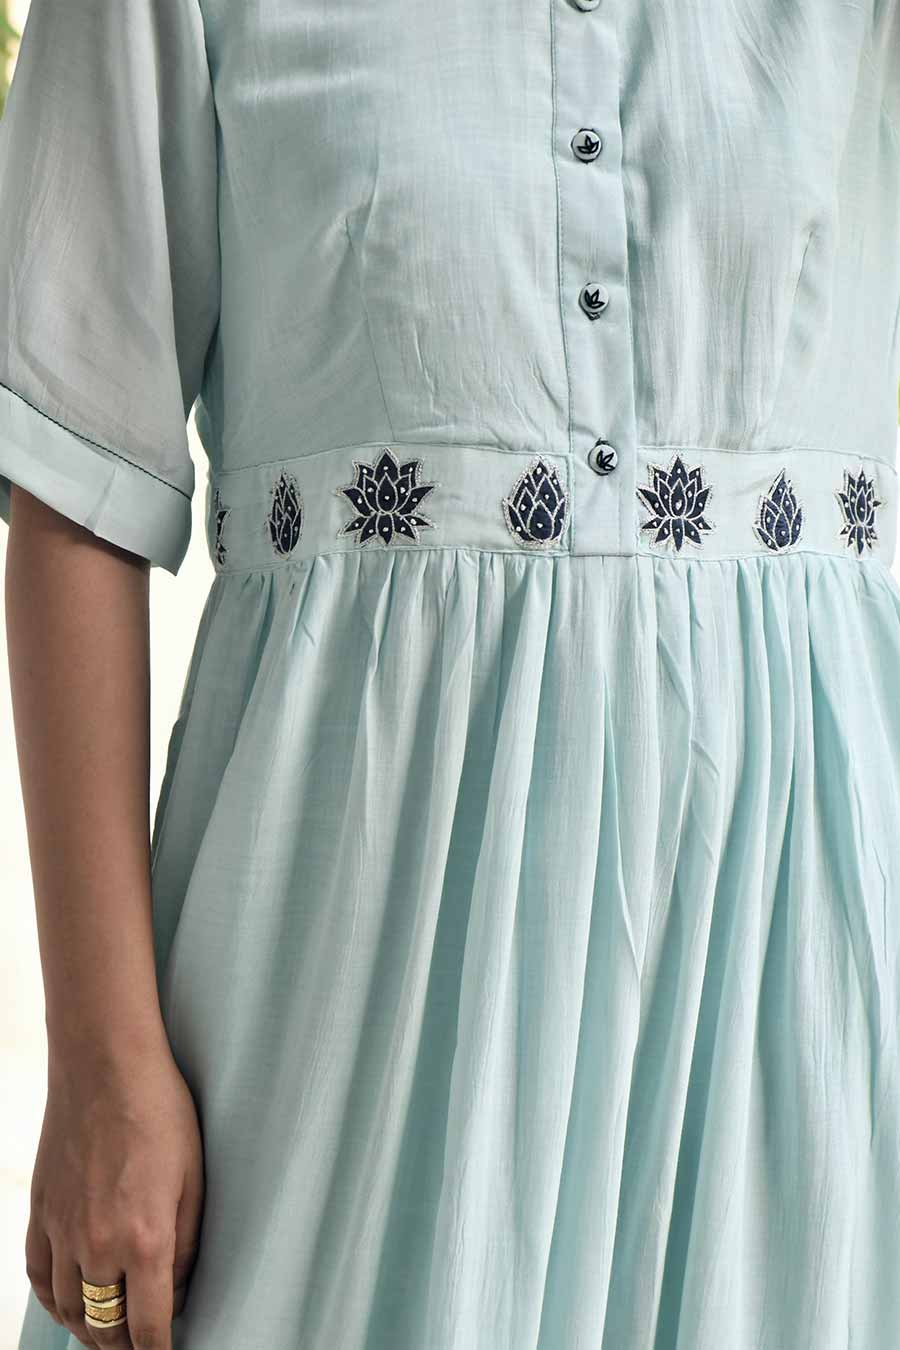 Dreamy Morning Embroidered Blue Silk Dress